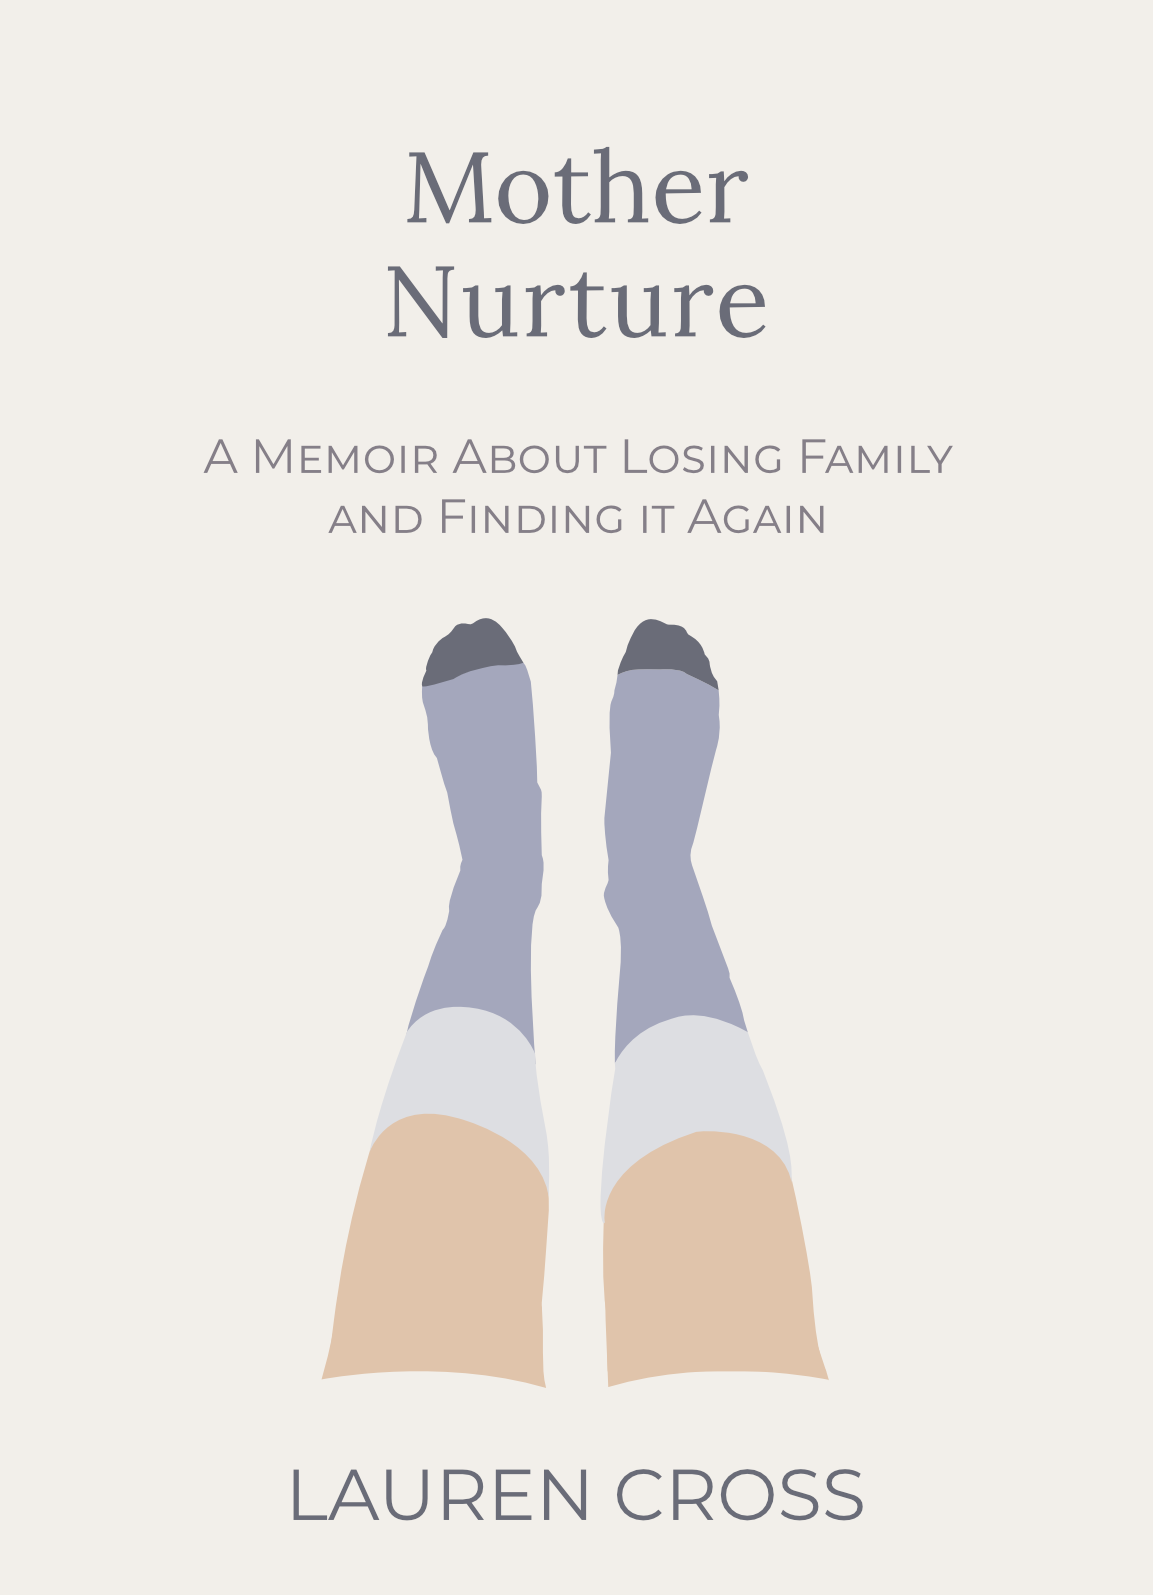 Motherhood Nurture: a memoir about losing family and finding it again